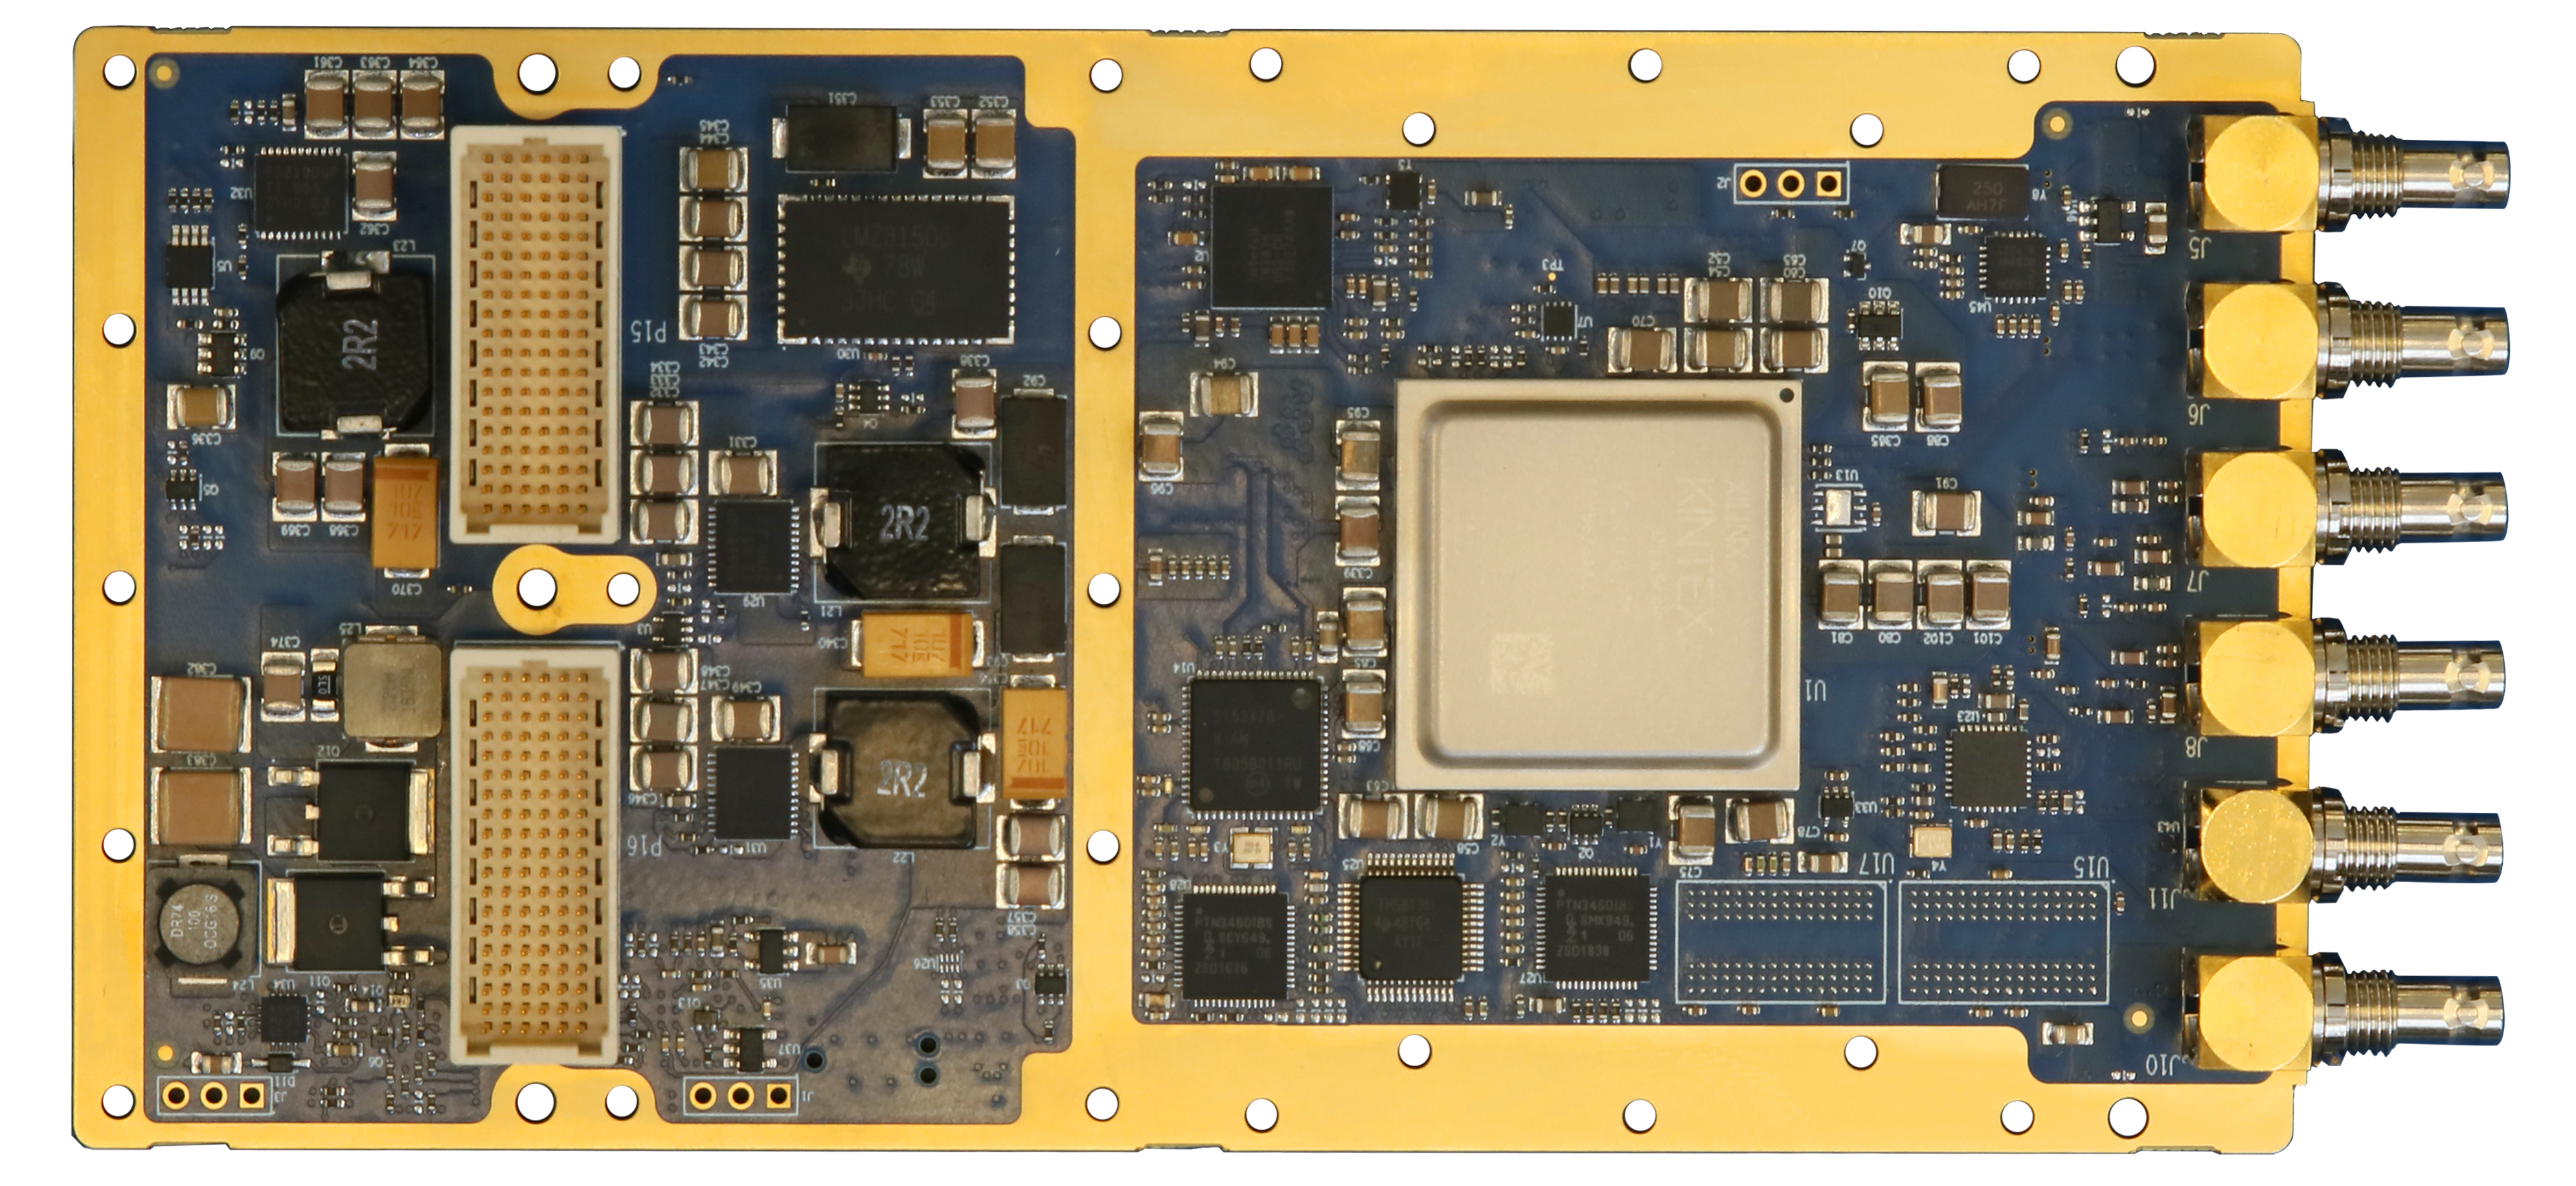 A new video card developed by WOLF Advanced Technology